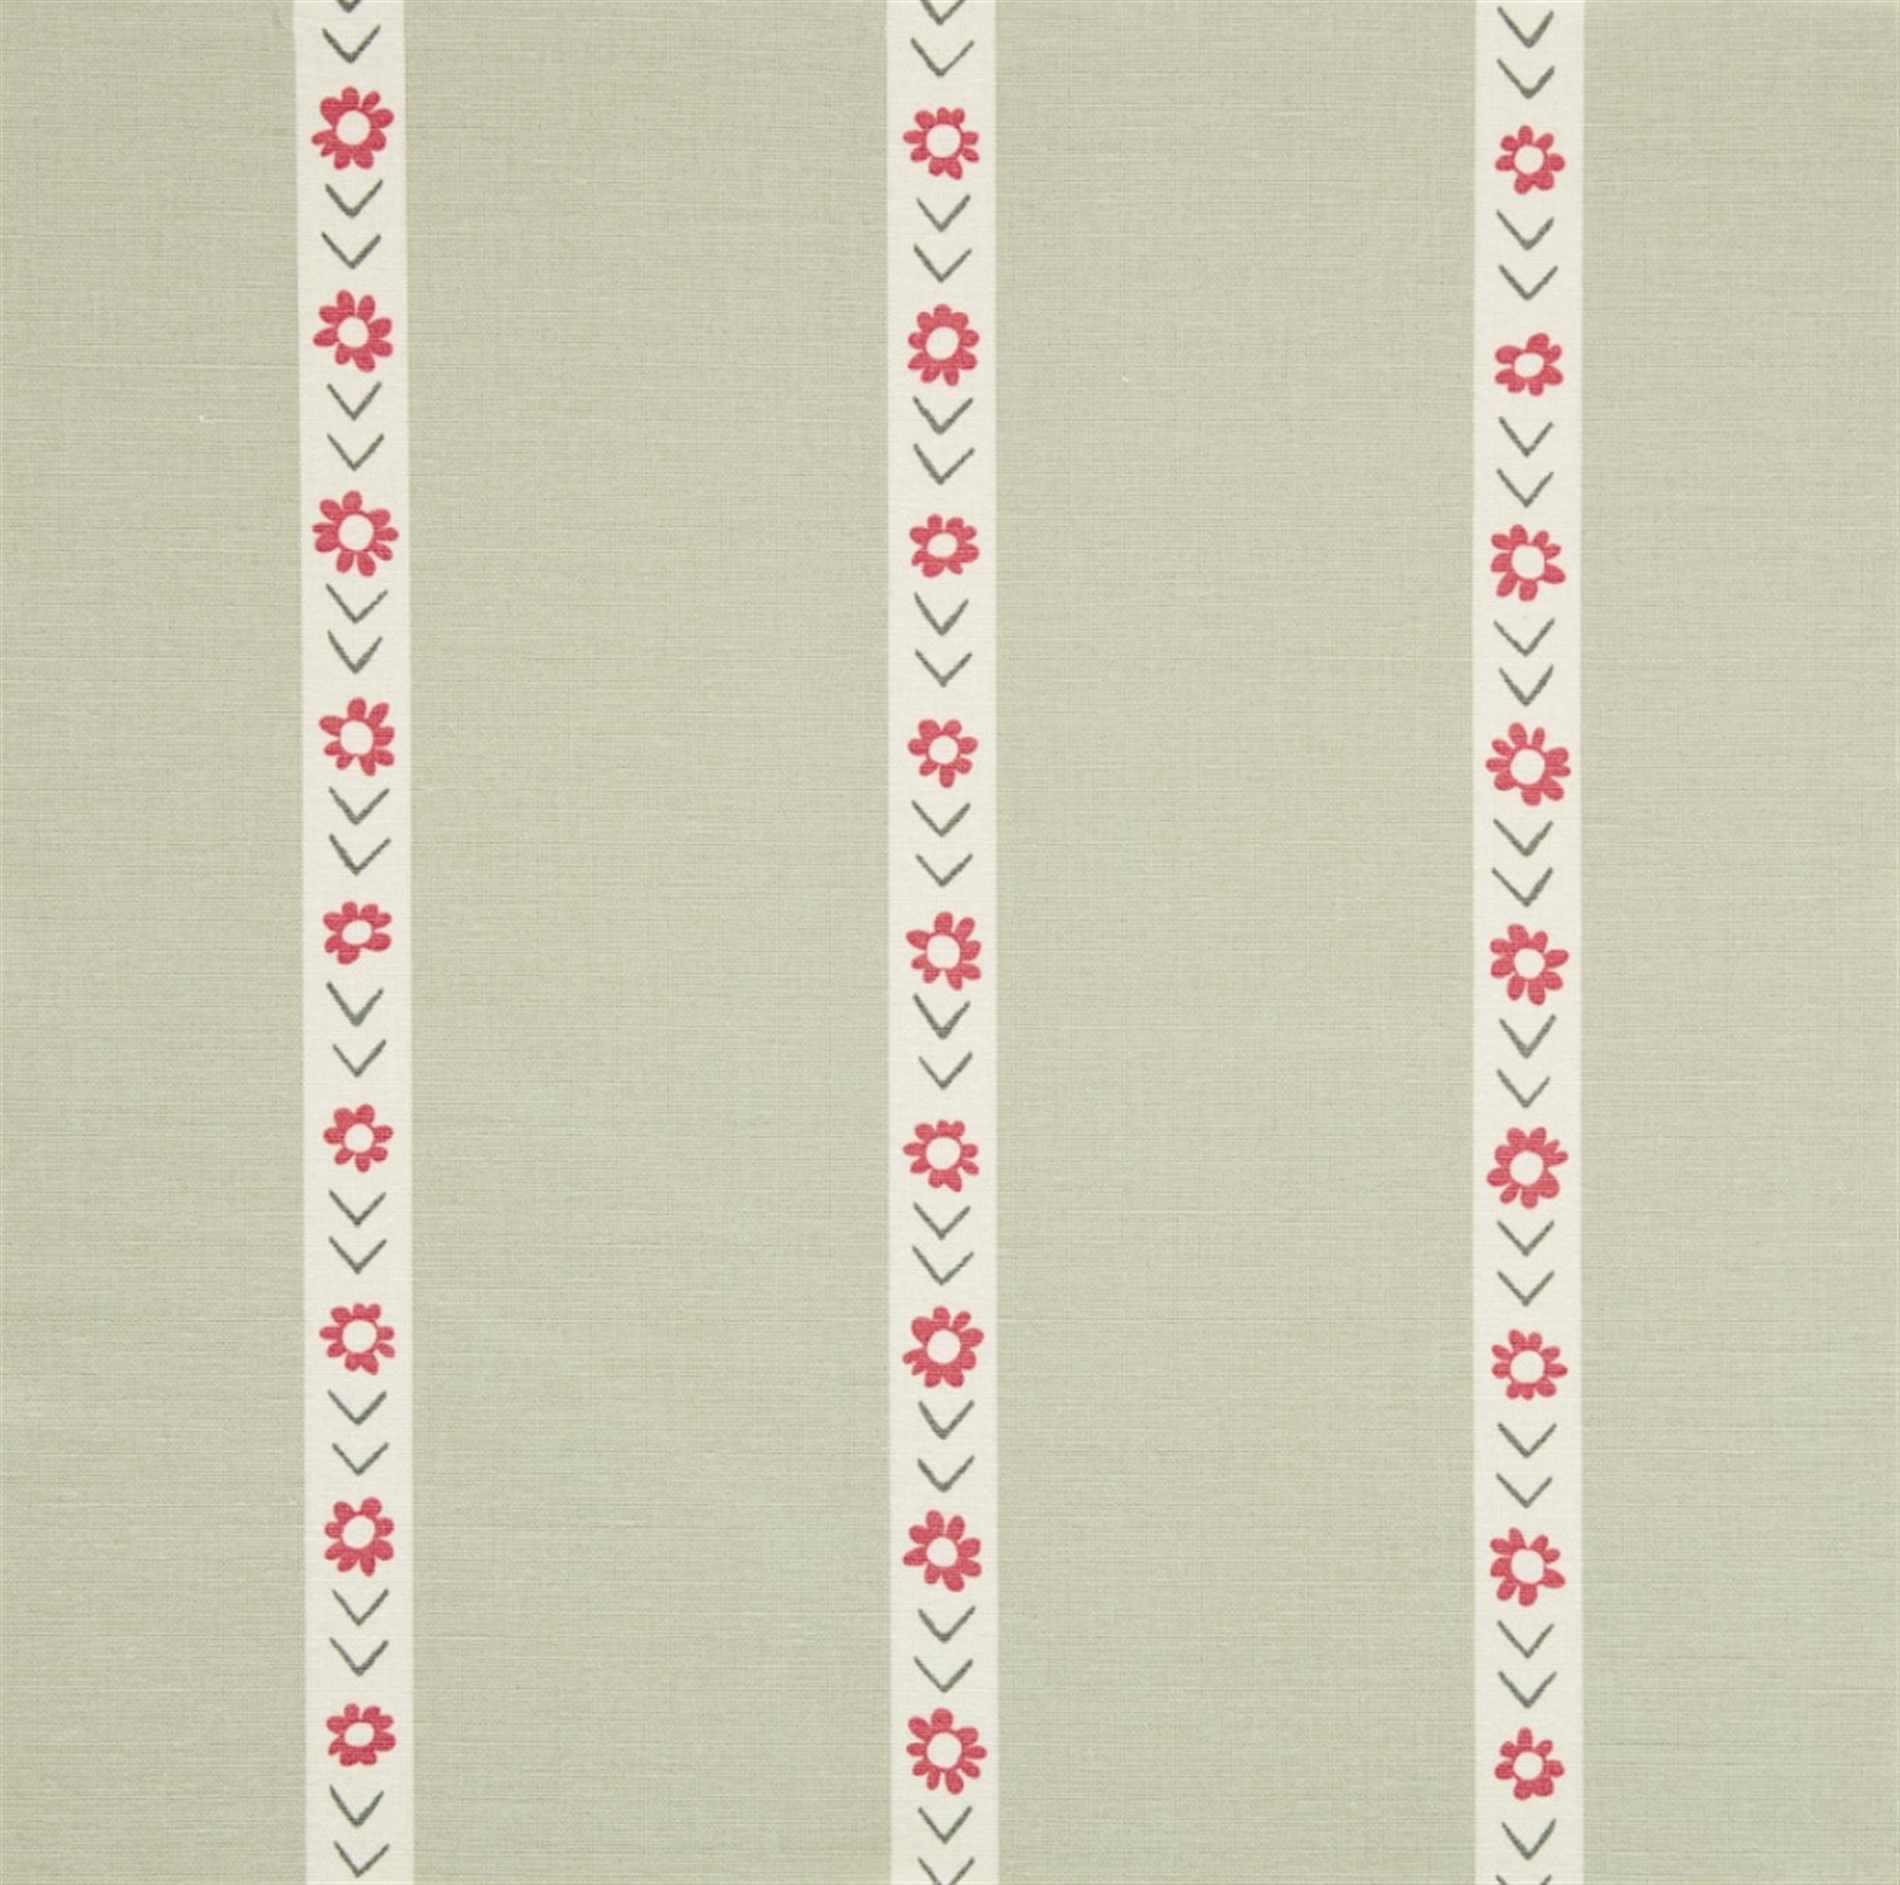 Floral Stripe - Pigeon, Soft Raspberry, Charcoal Fabric